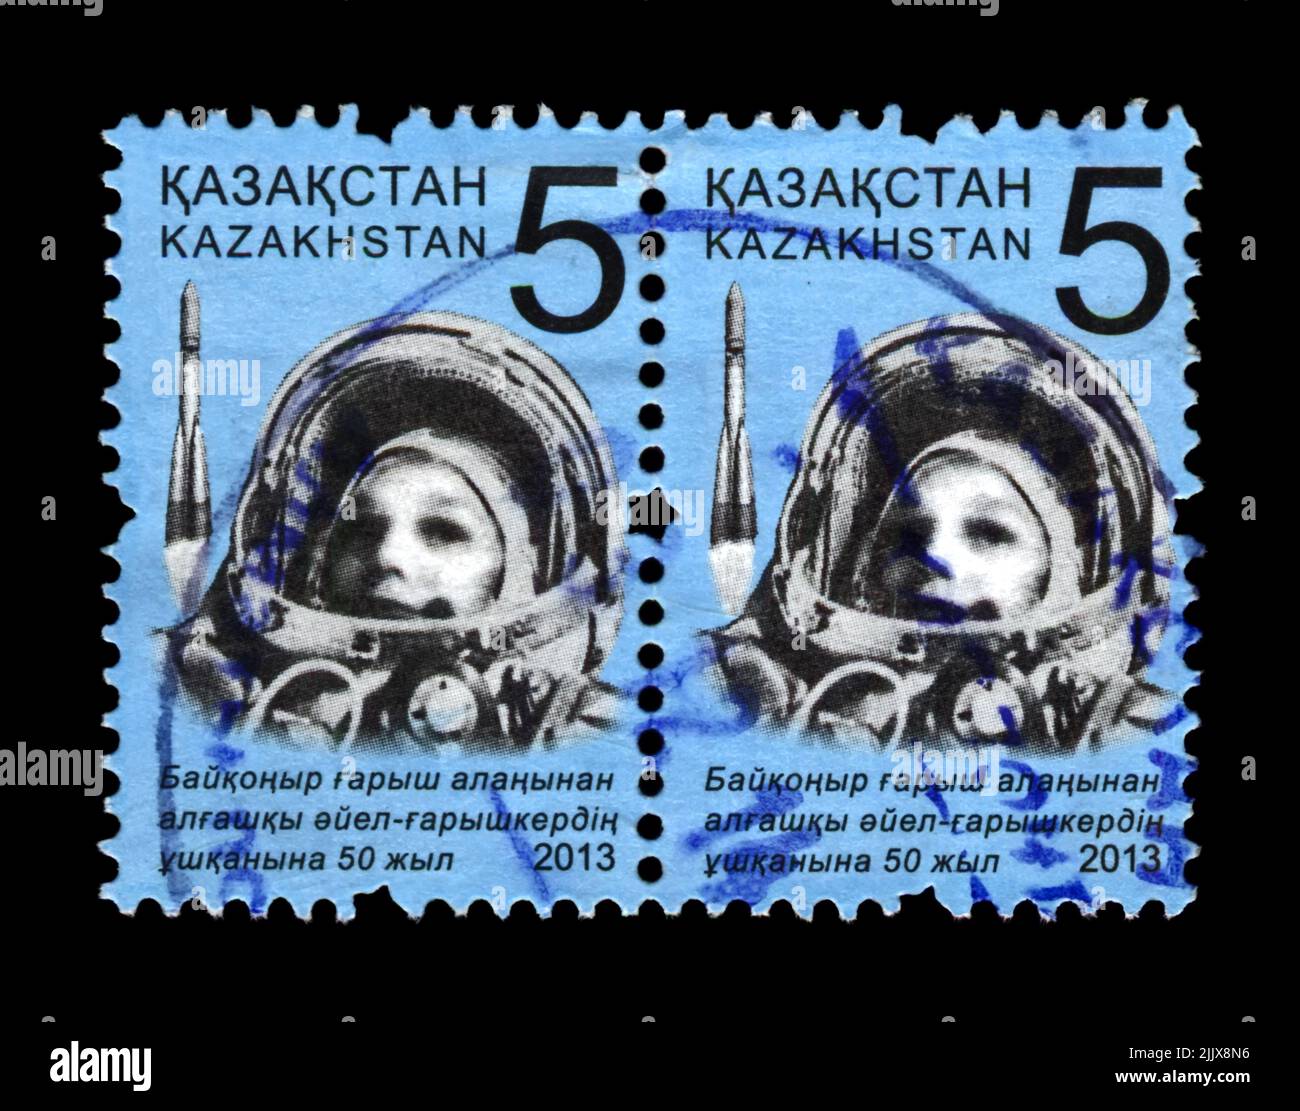 soviet astronaut Valentina Tereshkova, 1st woman in the space, circa 2013. canceled postal stamp printed in Kazakhstan isolated on black background. Stock Photo